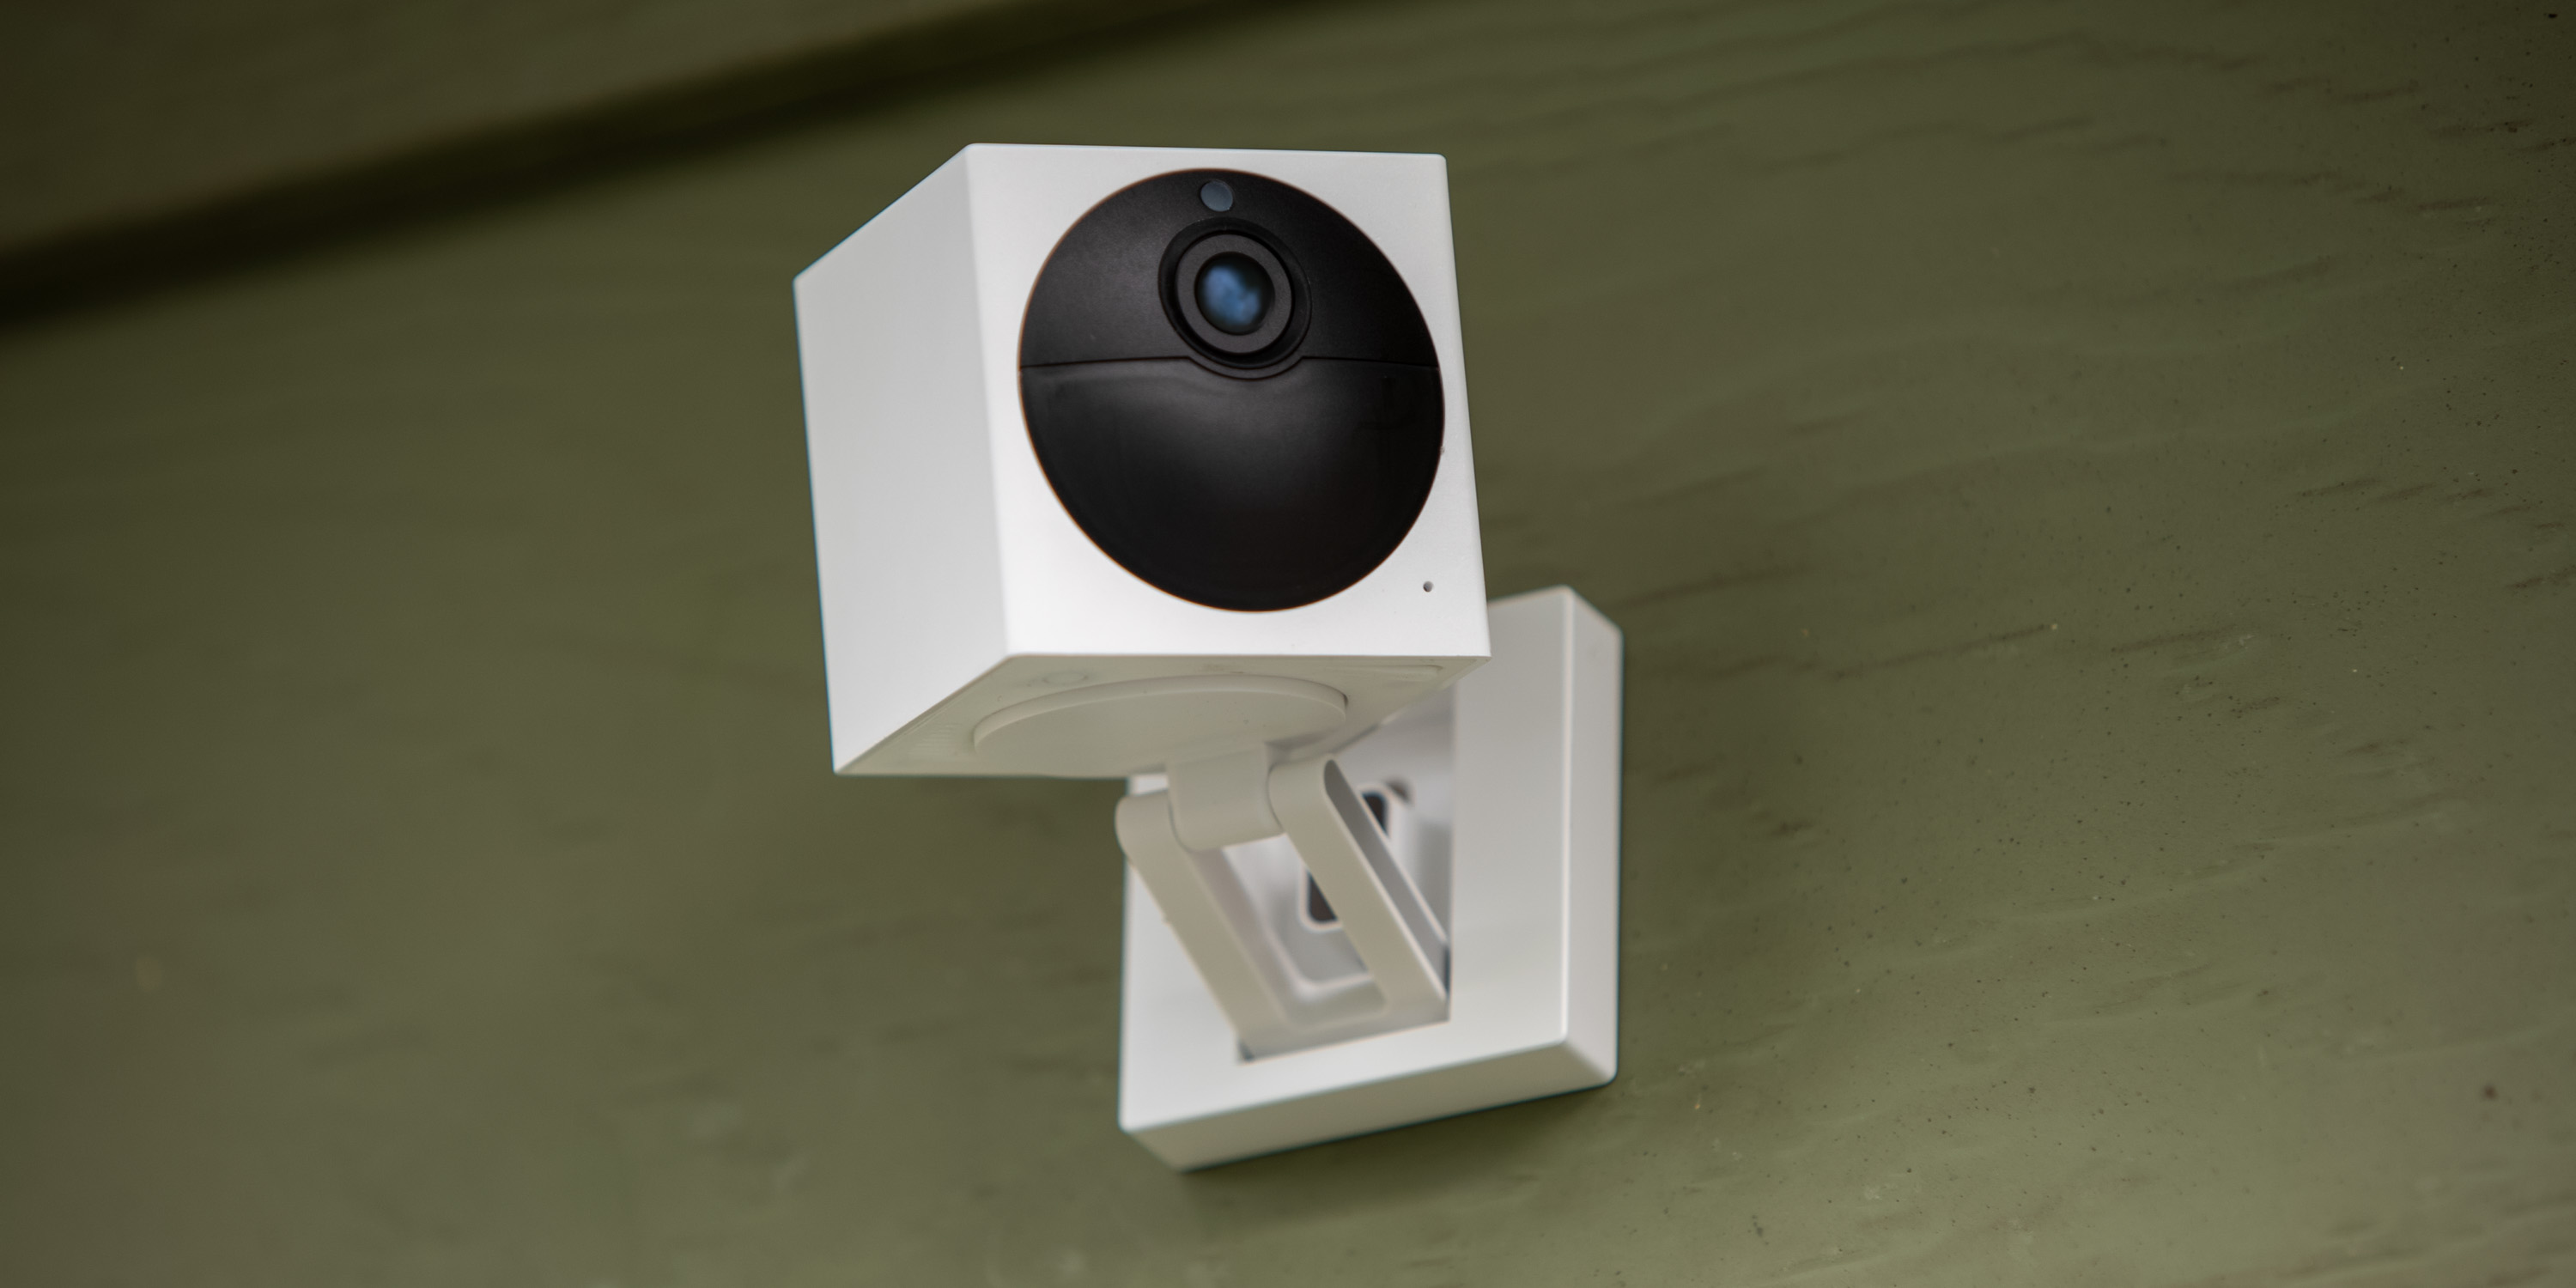 Prooi Systematisch Floreren Wyze Cam Outdoor Review: Easy wireless setup with night vision for $50